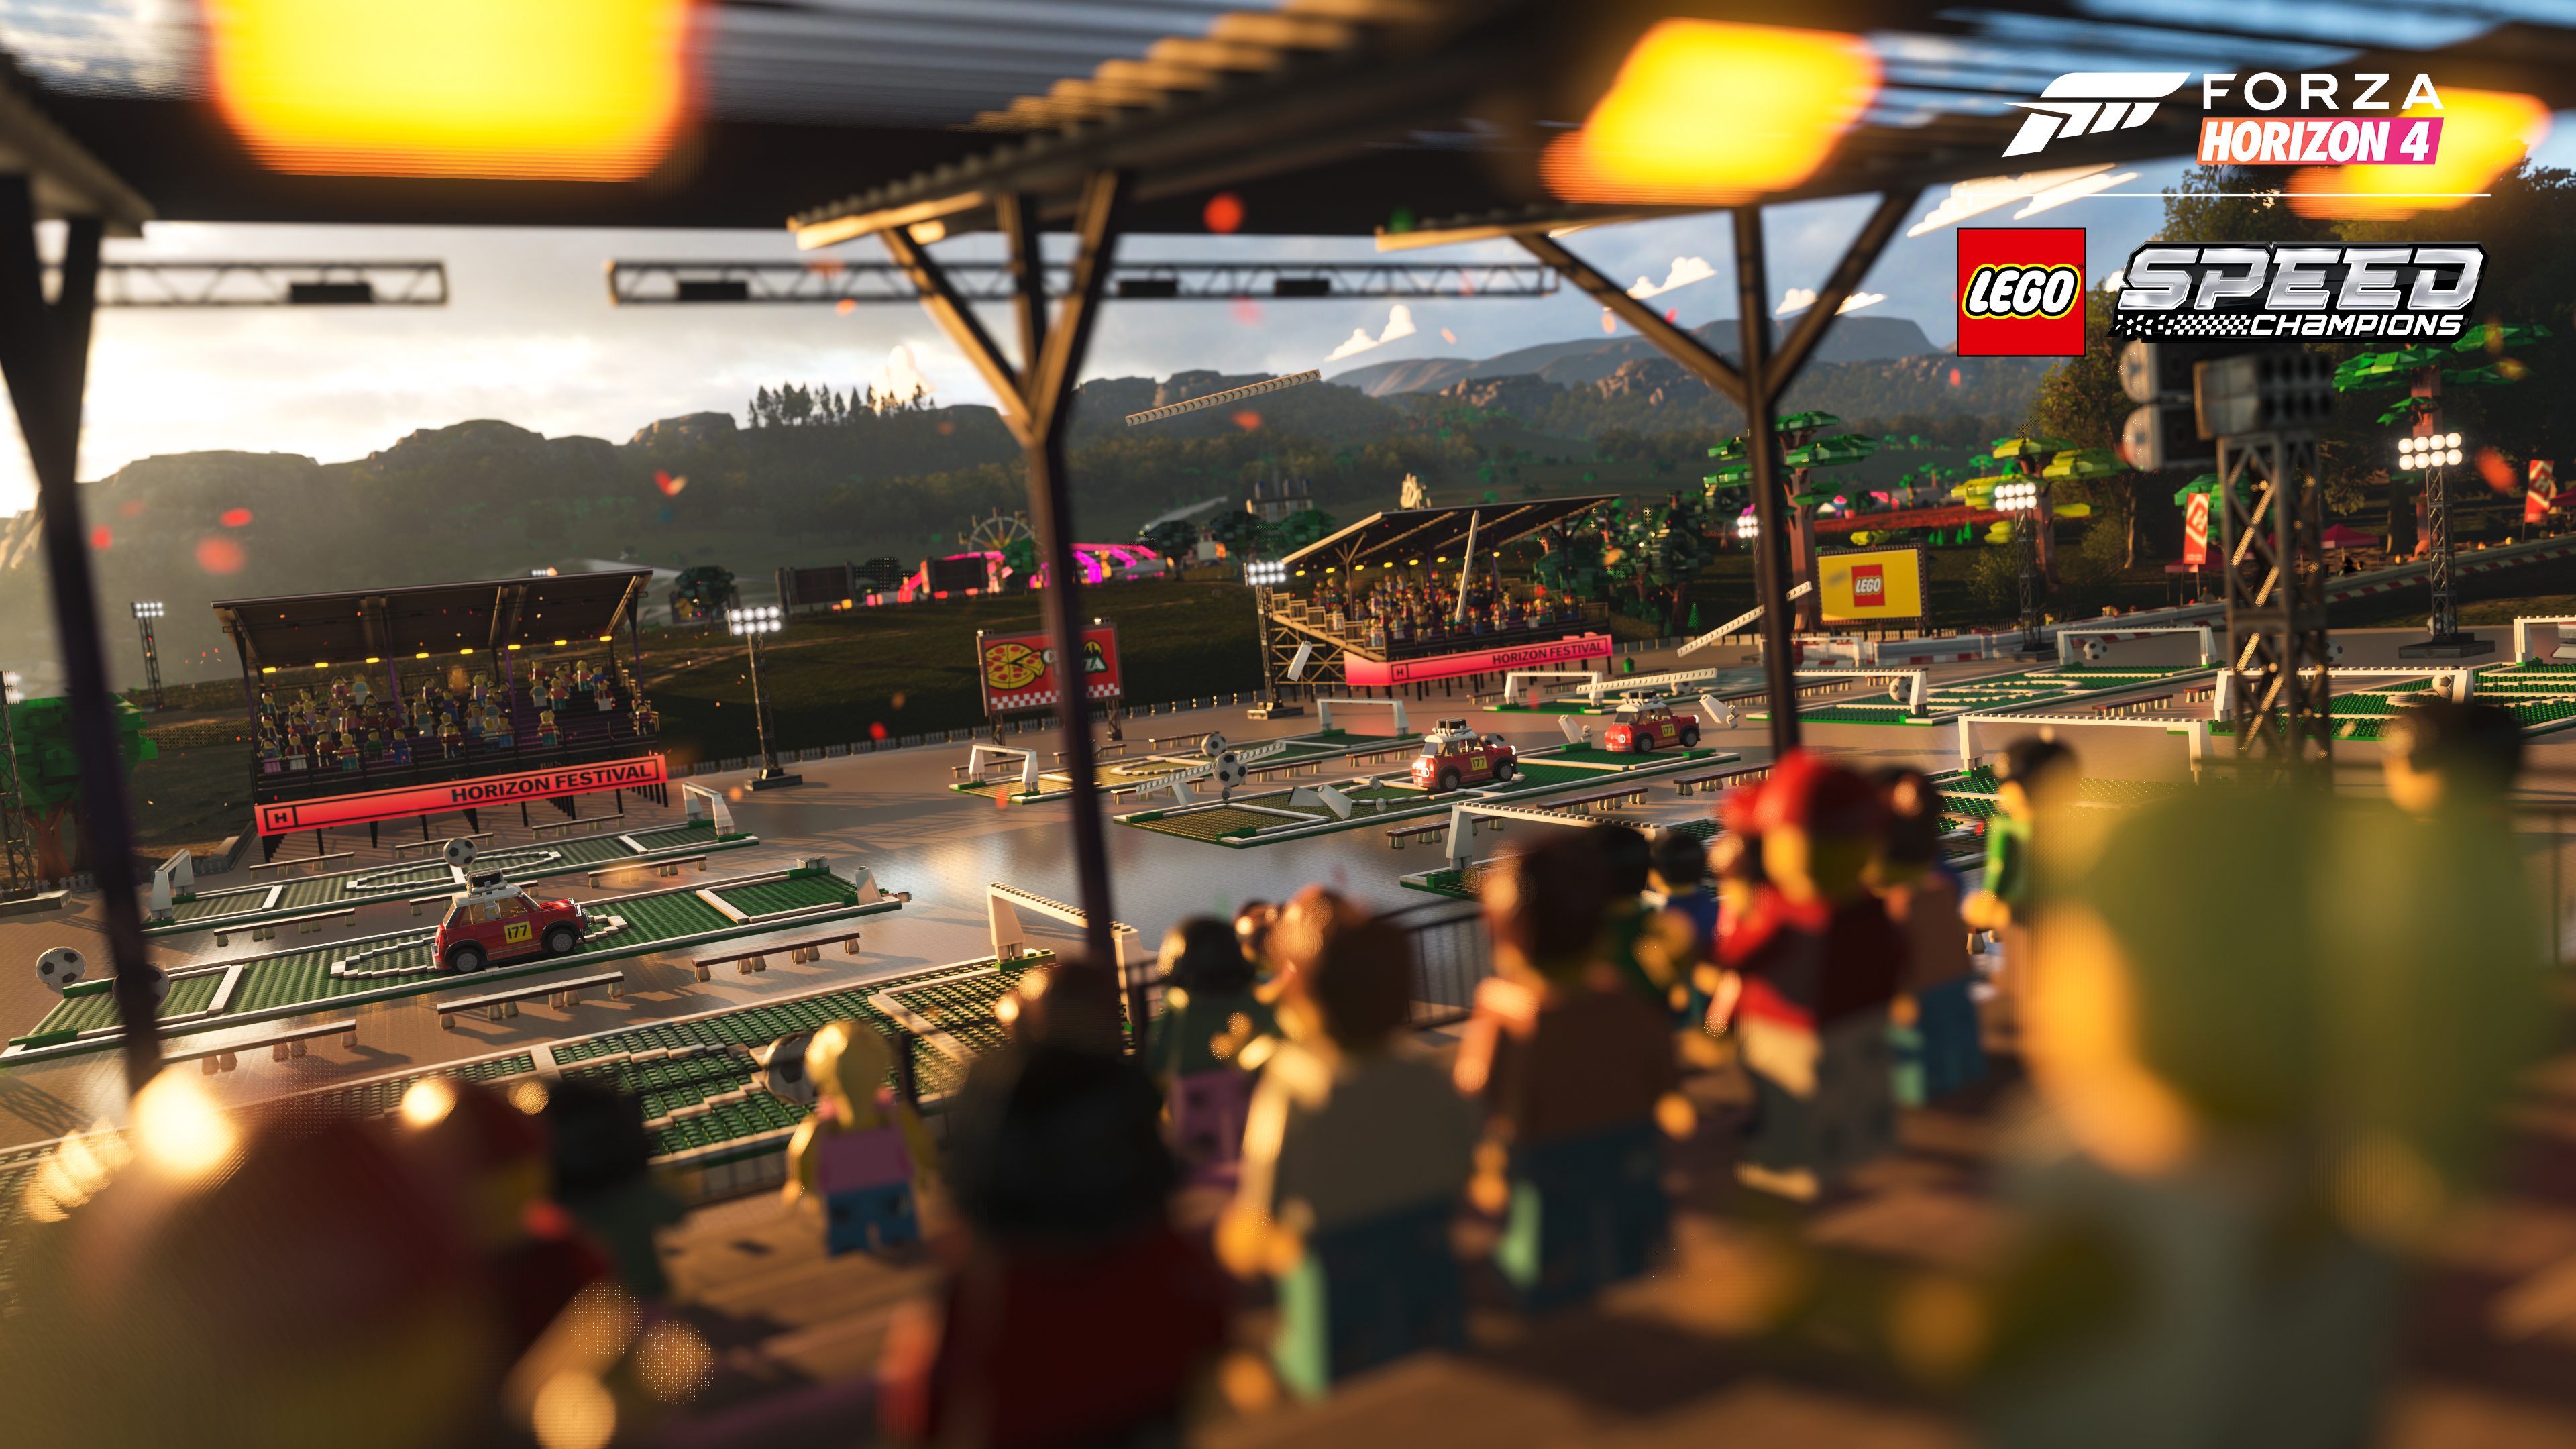 build Spiritus Desperat E3 2019: Forza Horizon 4 Brings the Ultimate LEGO Speed Champions Fantasy  to Life in the Newest Expansion for the Award-Winning Series - Xbox Wire